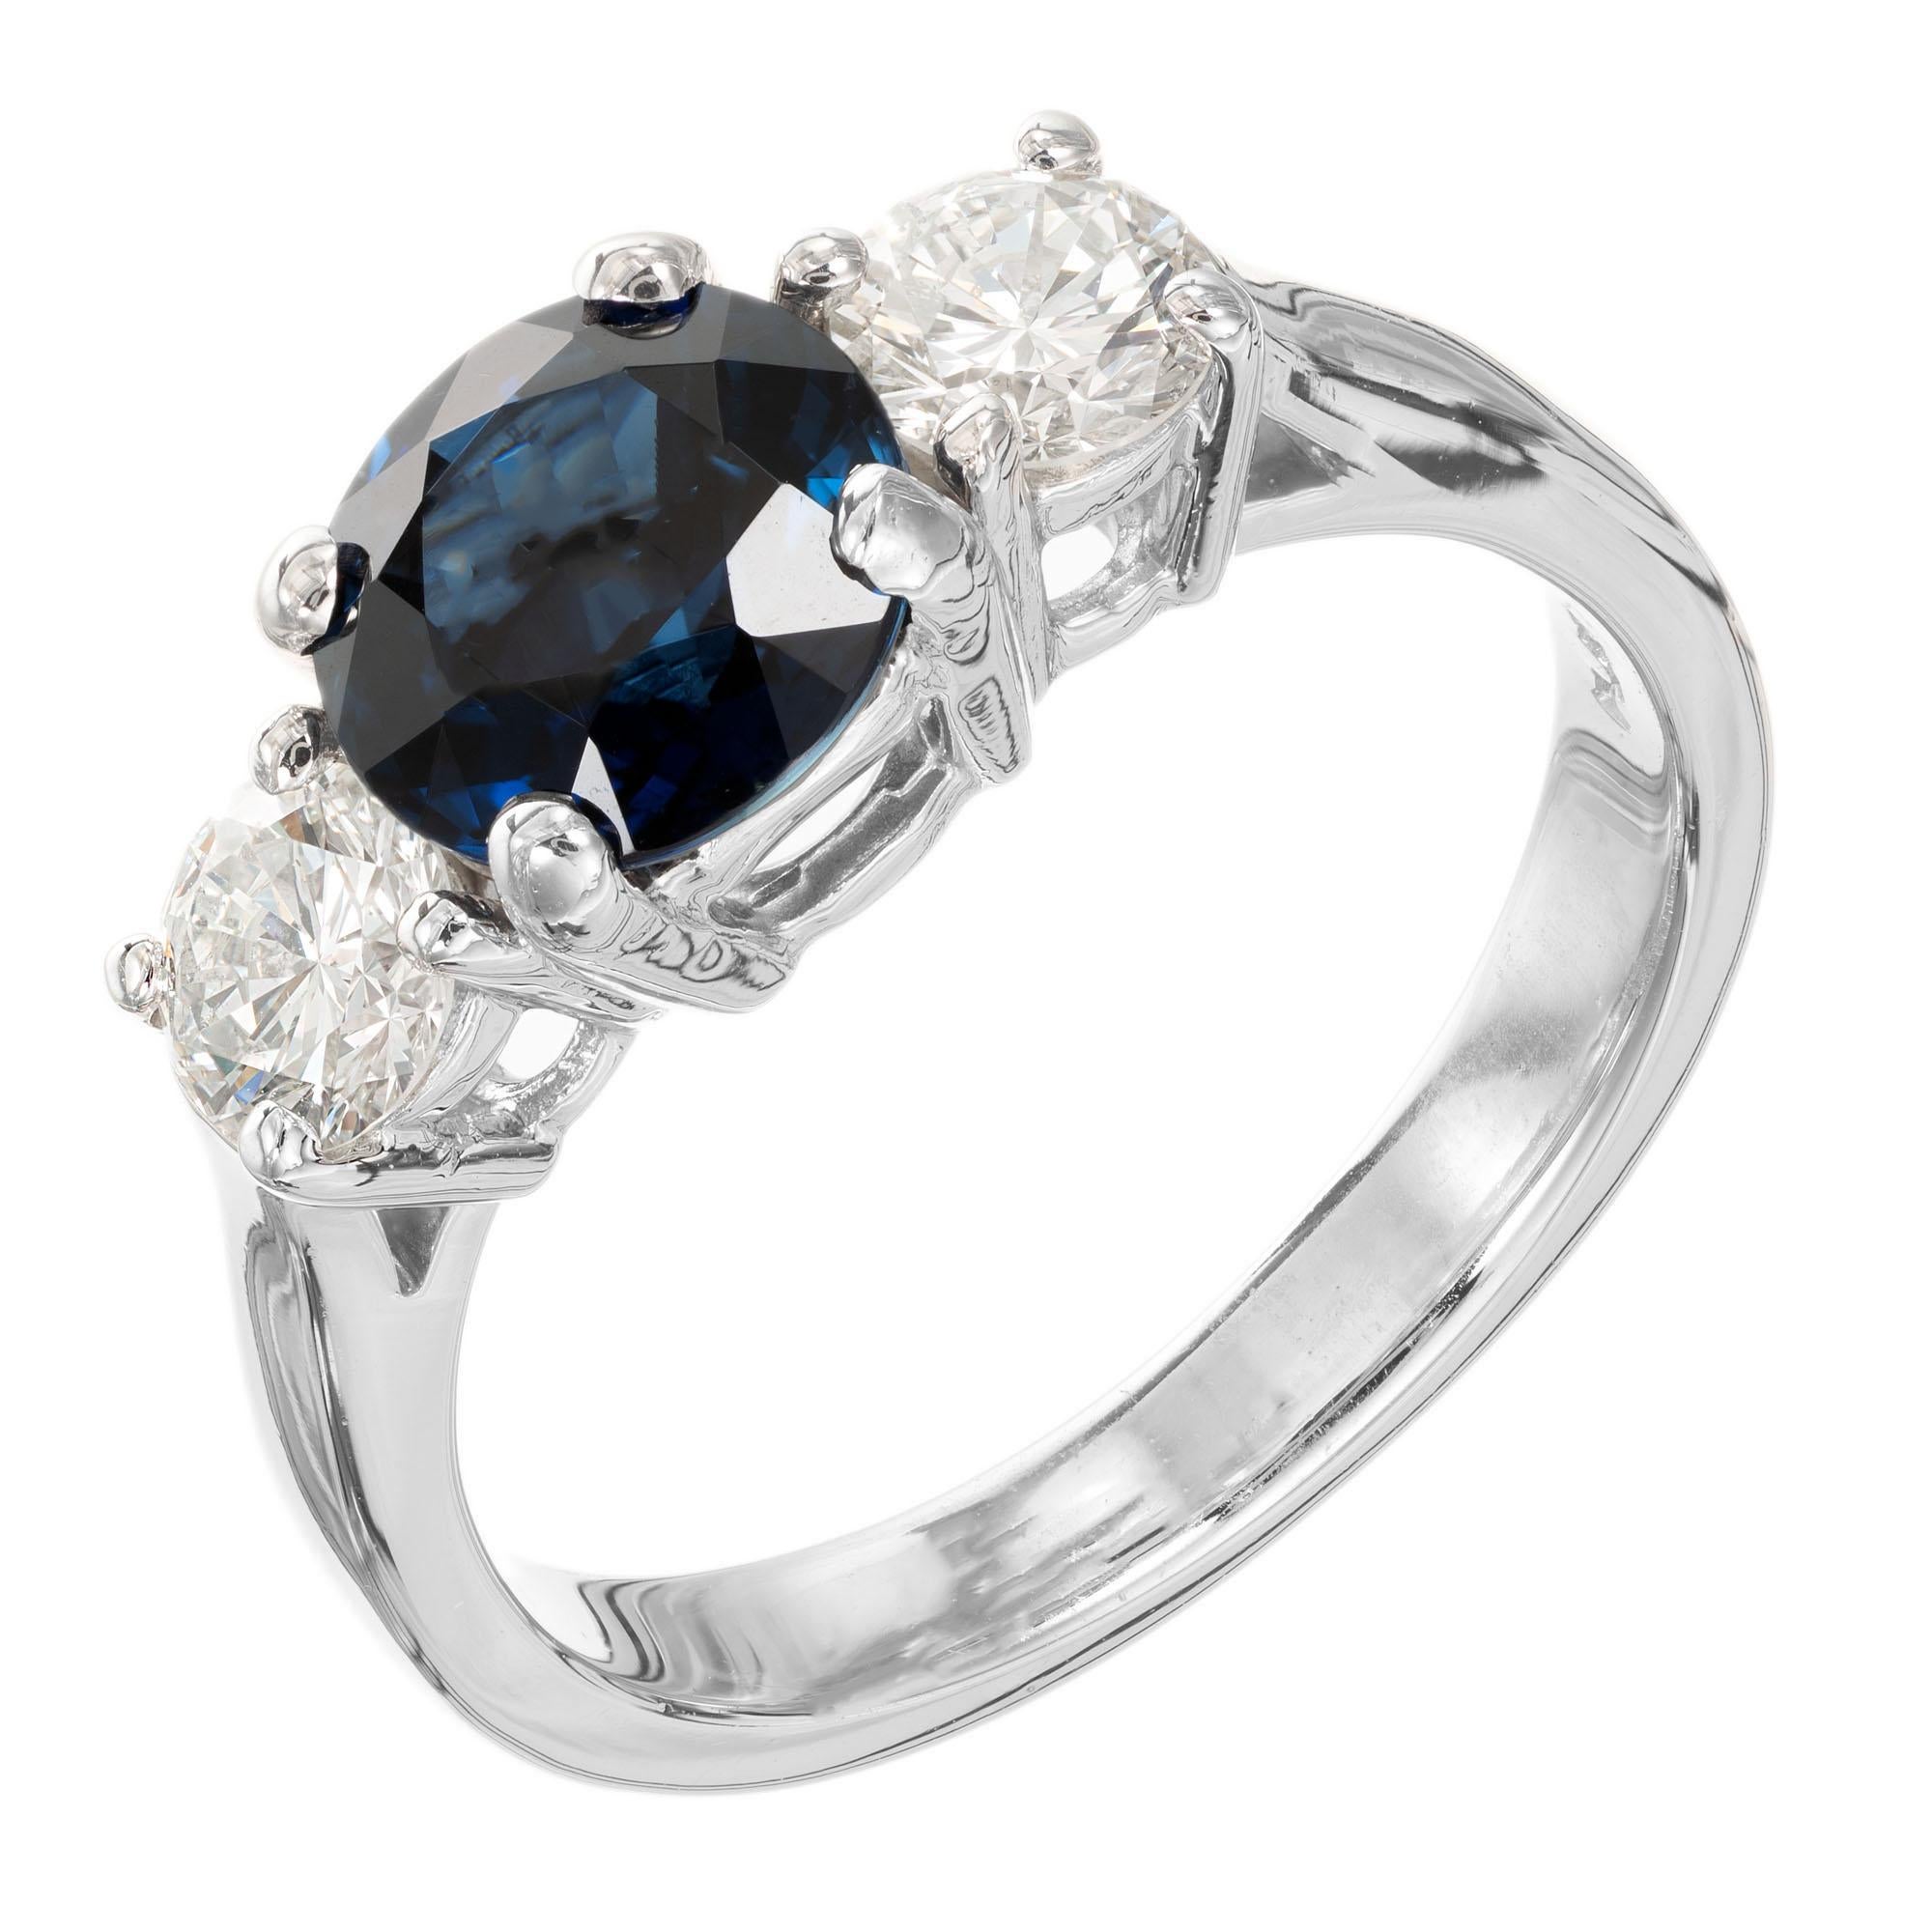 Sapphire and diamond three-stone engagement ring. GIA Certified natural no heat center sapphire with two round accent brilliant cut diamonds in a platinum setting from the Peter Suchy Workshop.  

1 round blue sapphire, SI approx. 1.91cts GIA